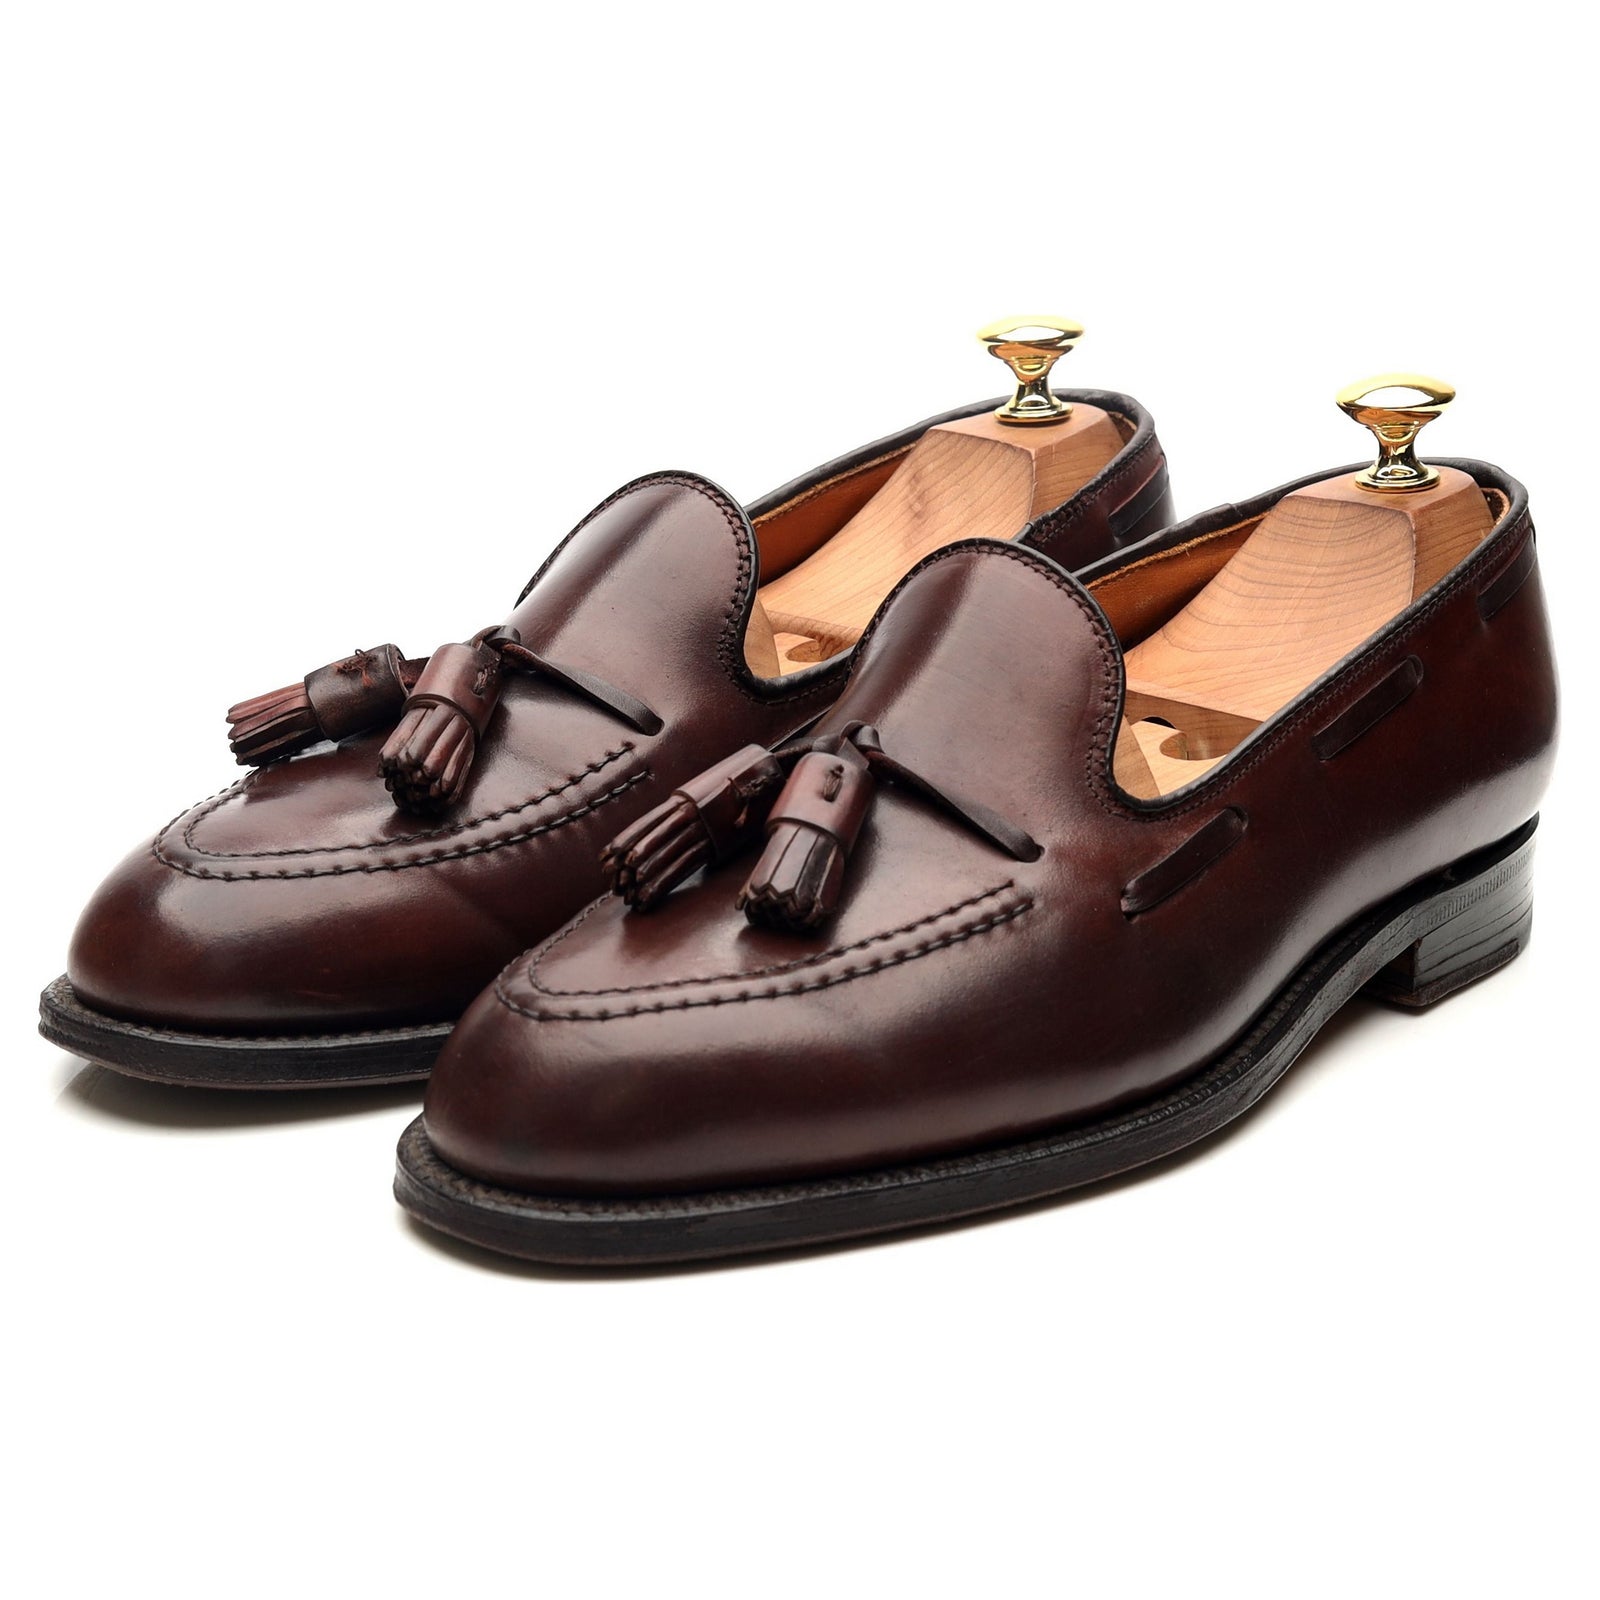 Sell Formal Shoes To Us | Abbot's Shoes